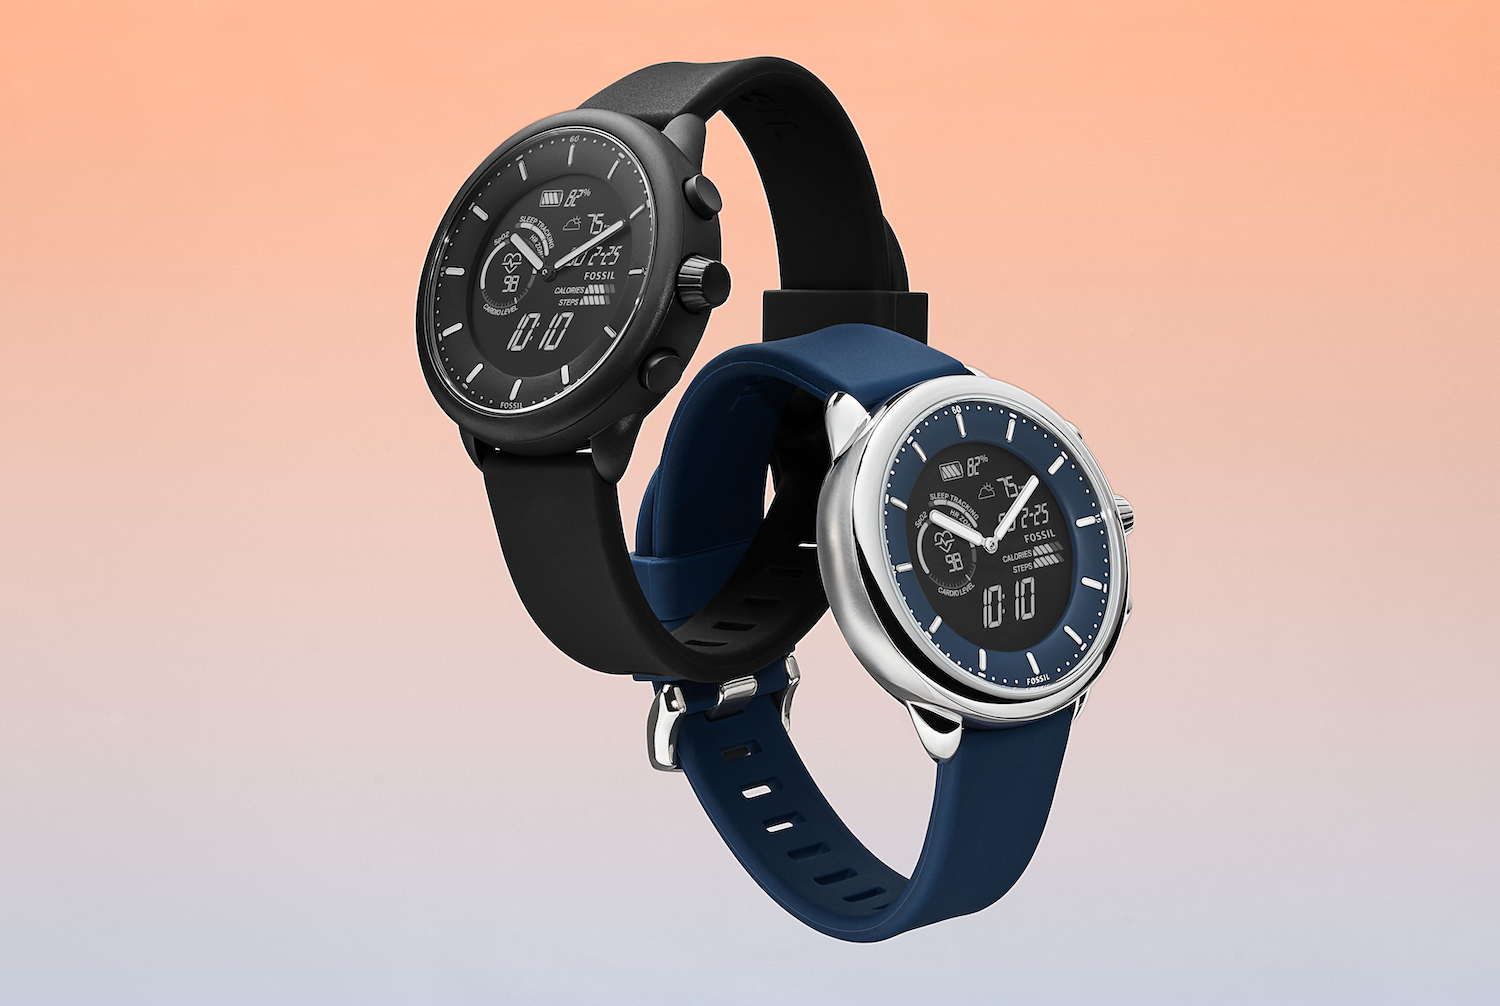 Fossil exits smartwatch market, ceding ground to tech giants